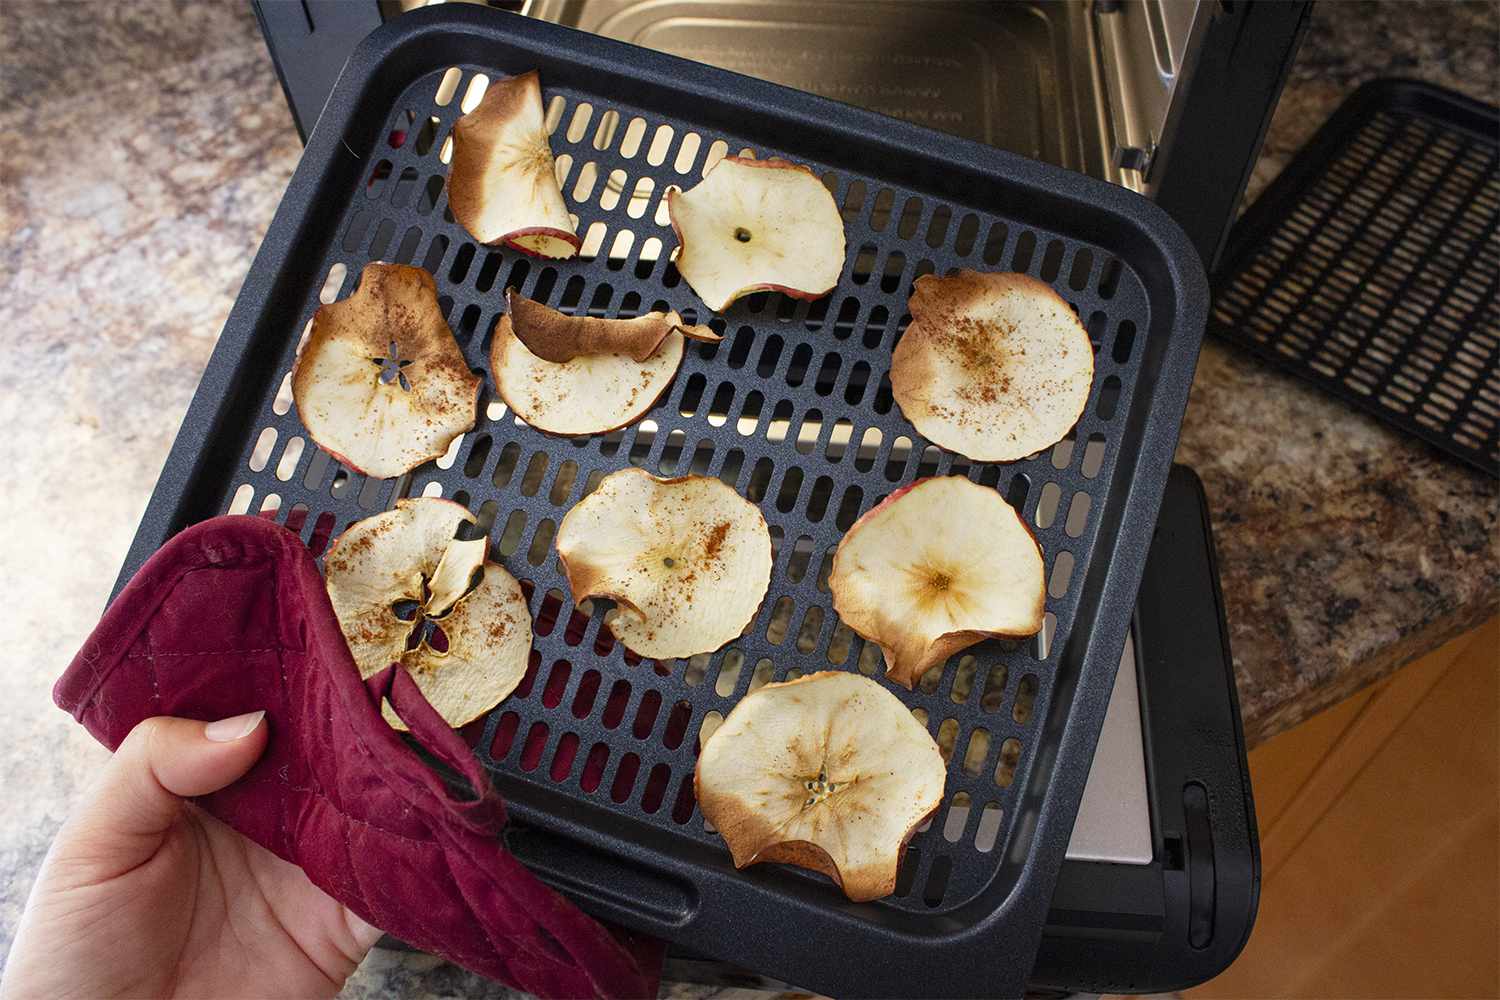 A hand using a towel to hold a tray of baked apple slices in front of the Instant Vortex Plus 7-in-1 Air Fryer Oven